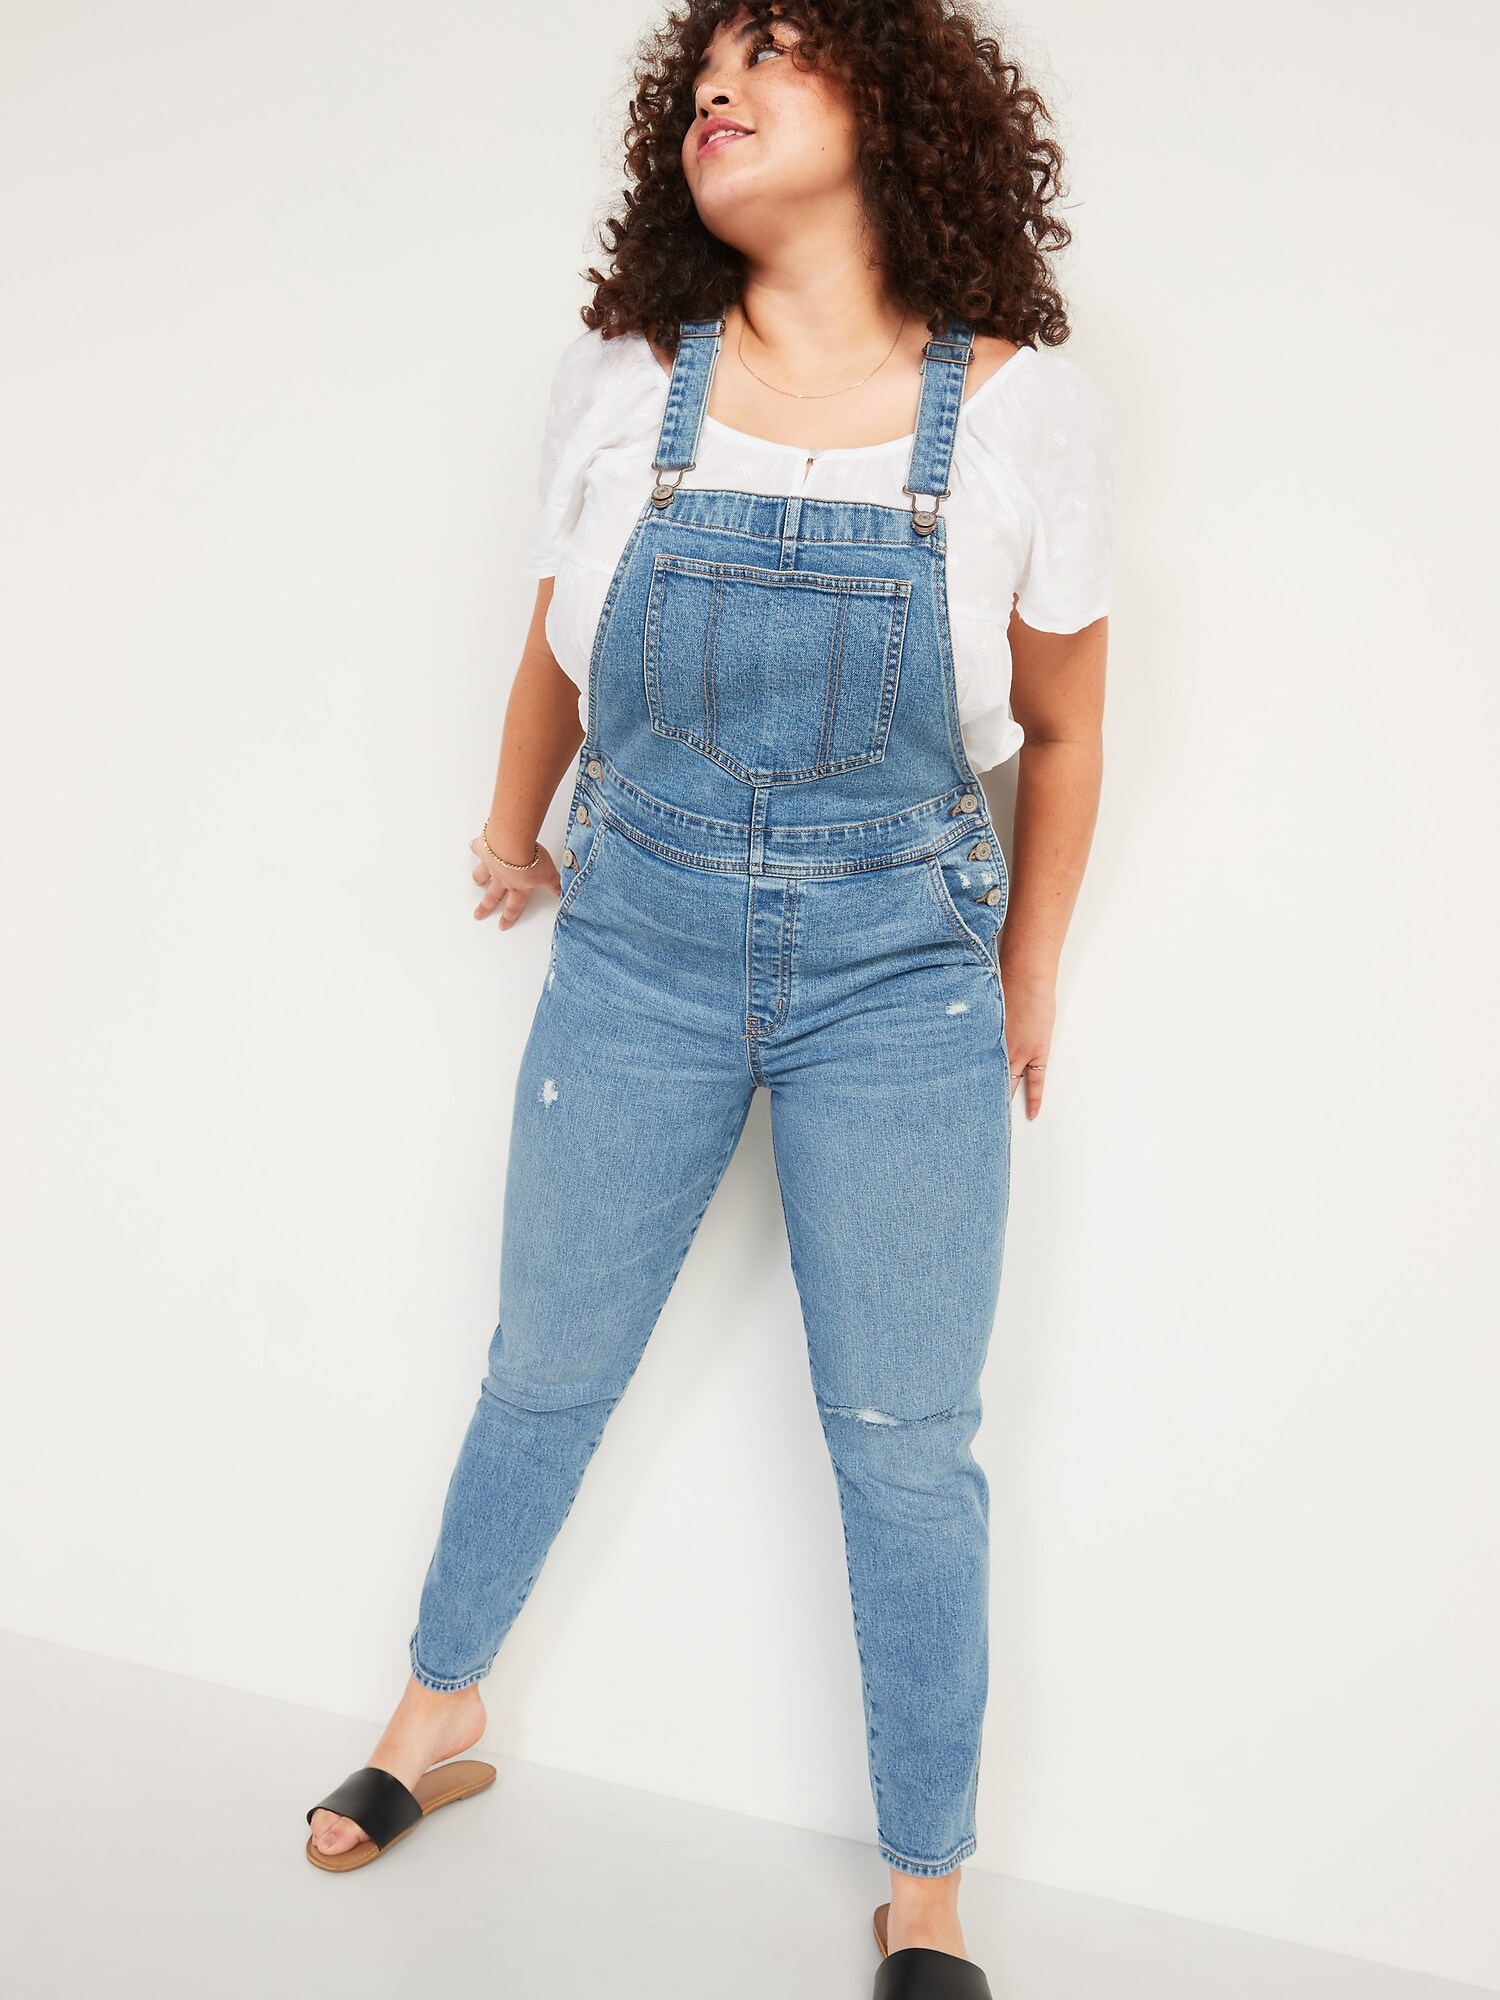 O.G. Workwear Straight Medium-Wash Ripped Jean Overalls for Women